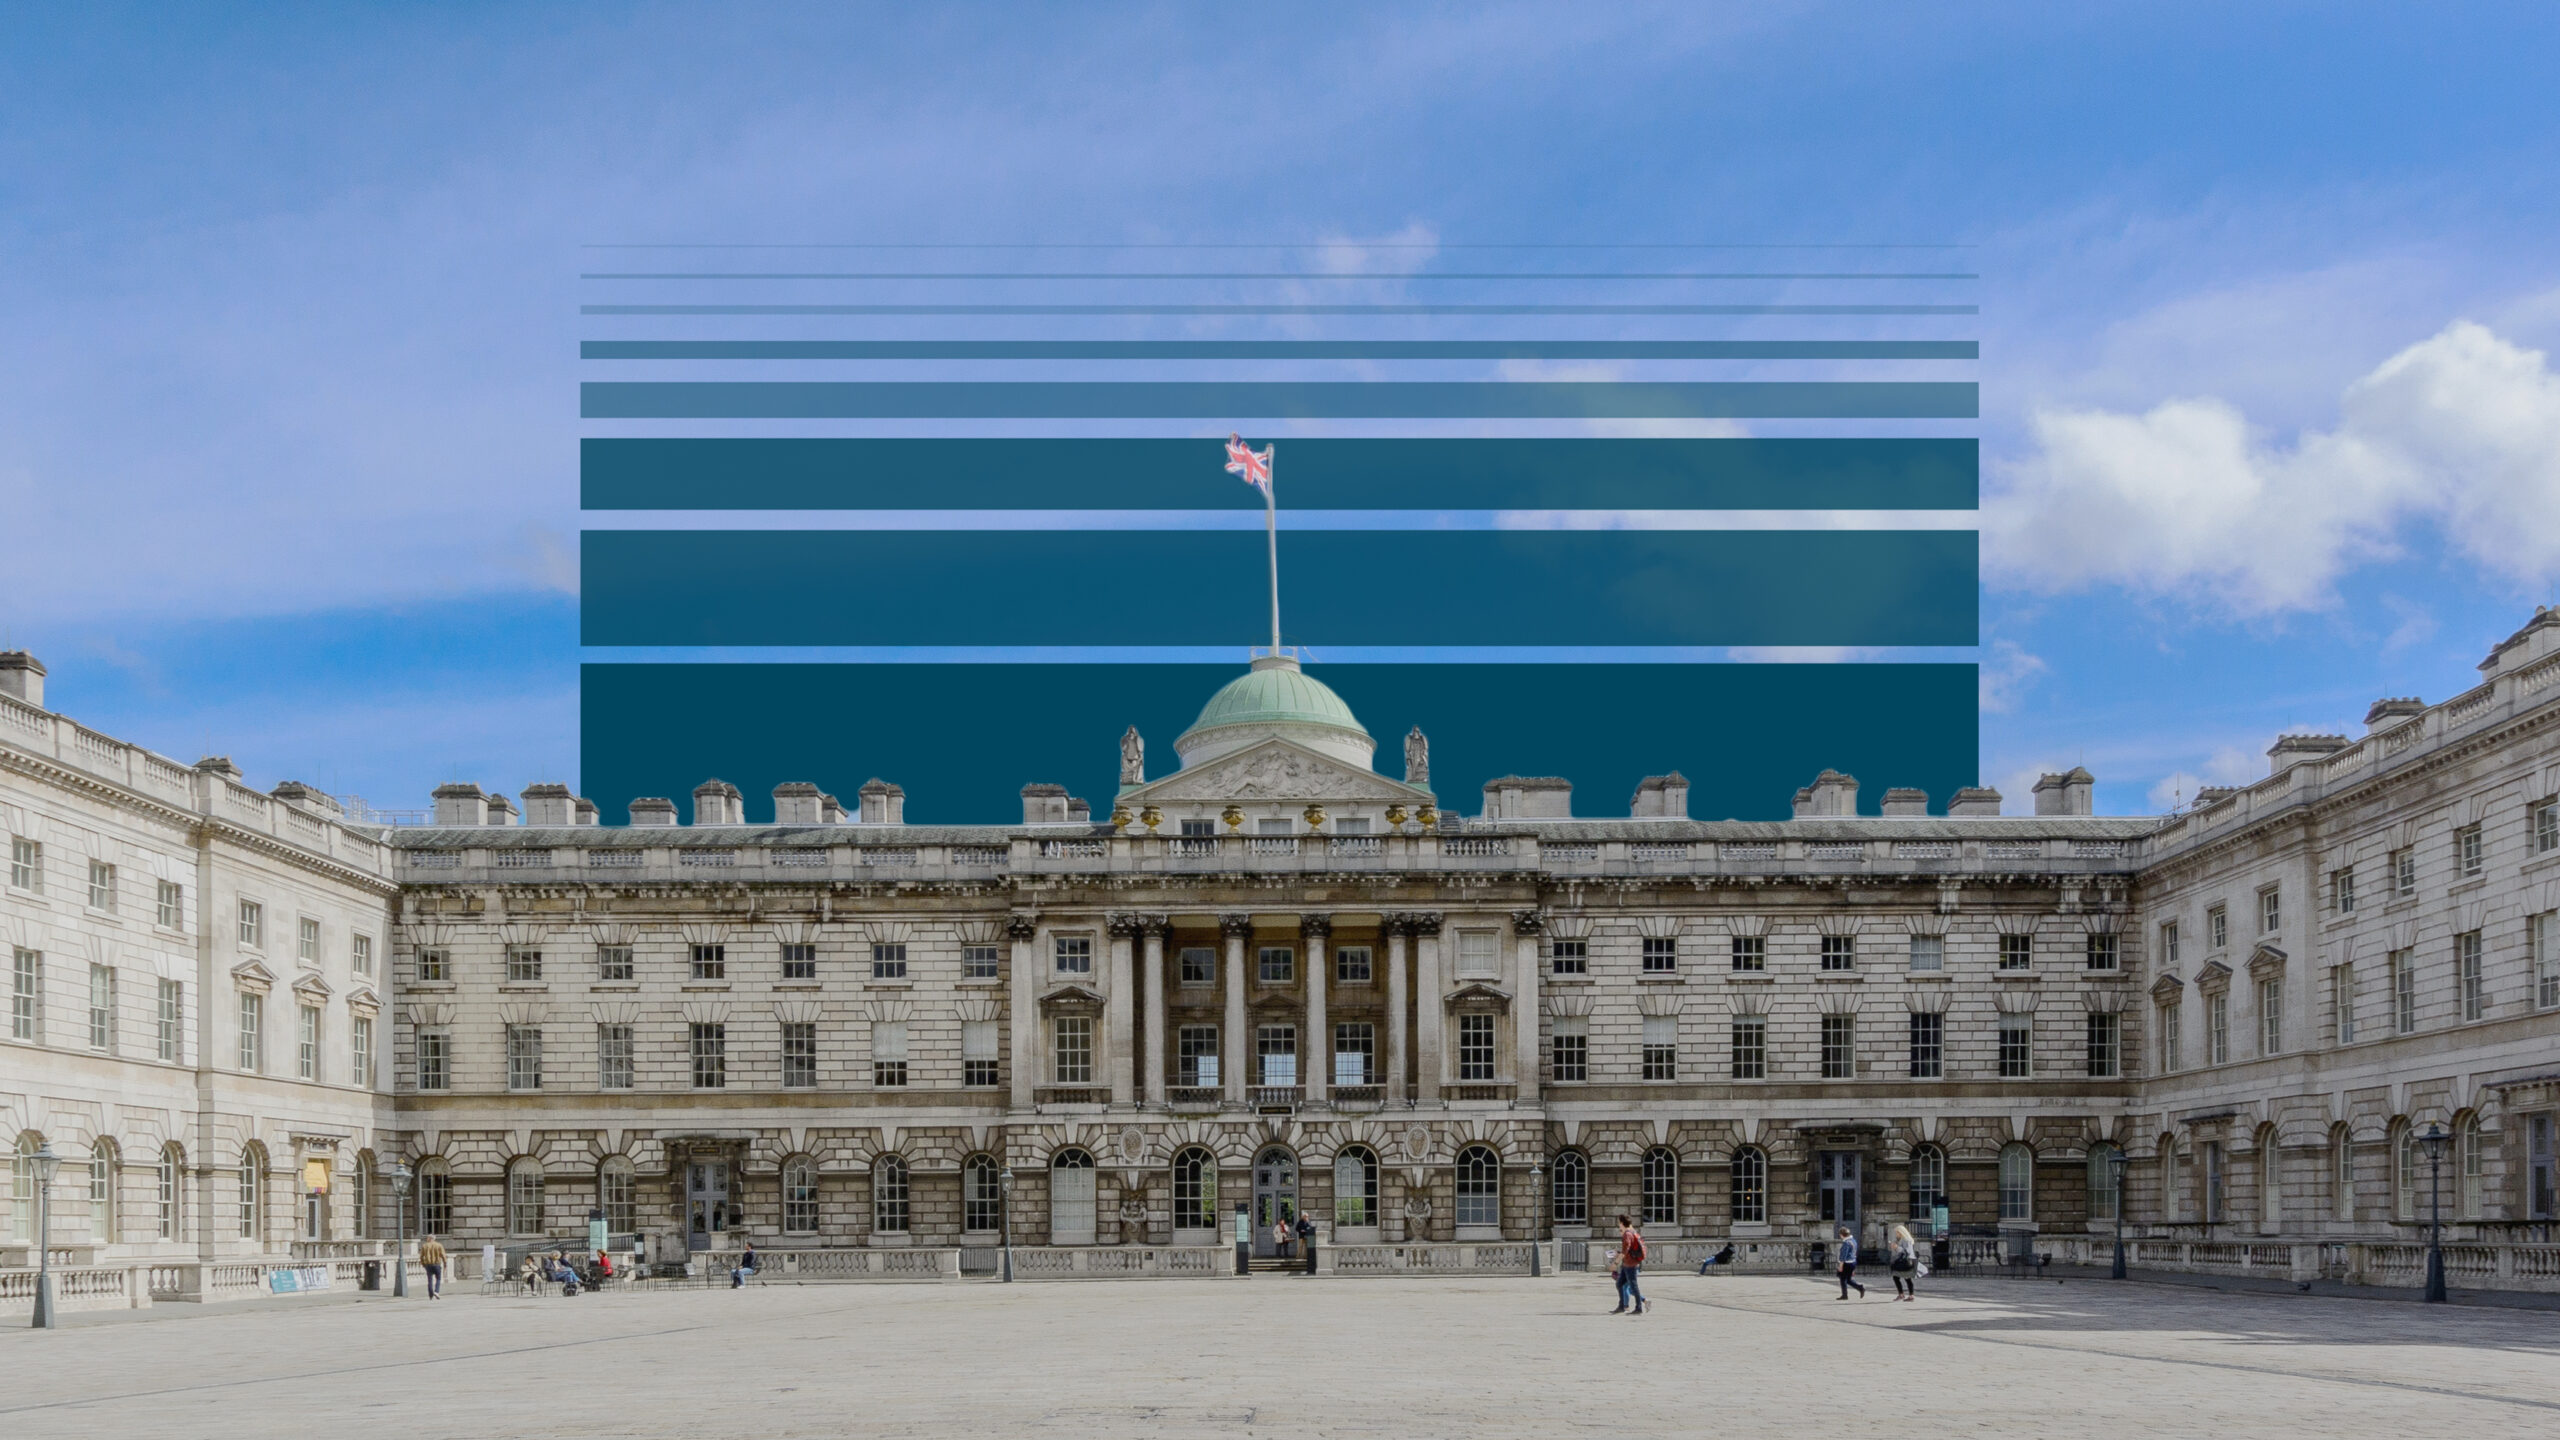 A scenic view of the famous Somerset House in London under a wispy sky